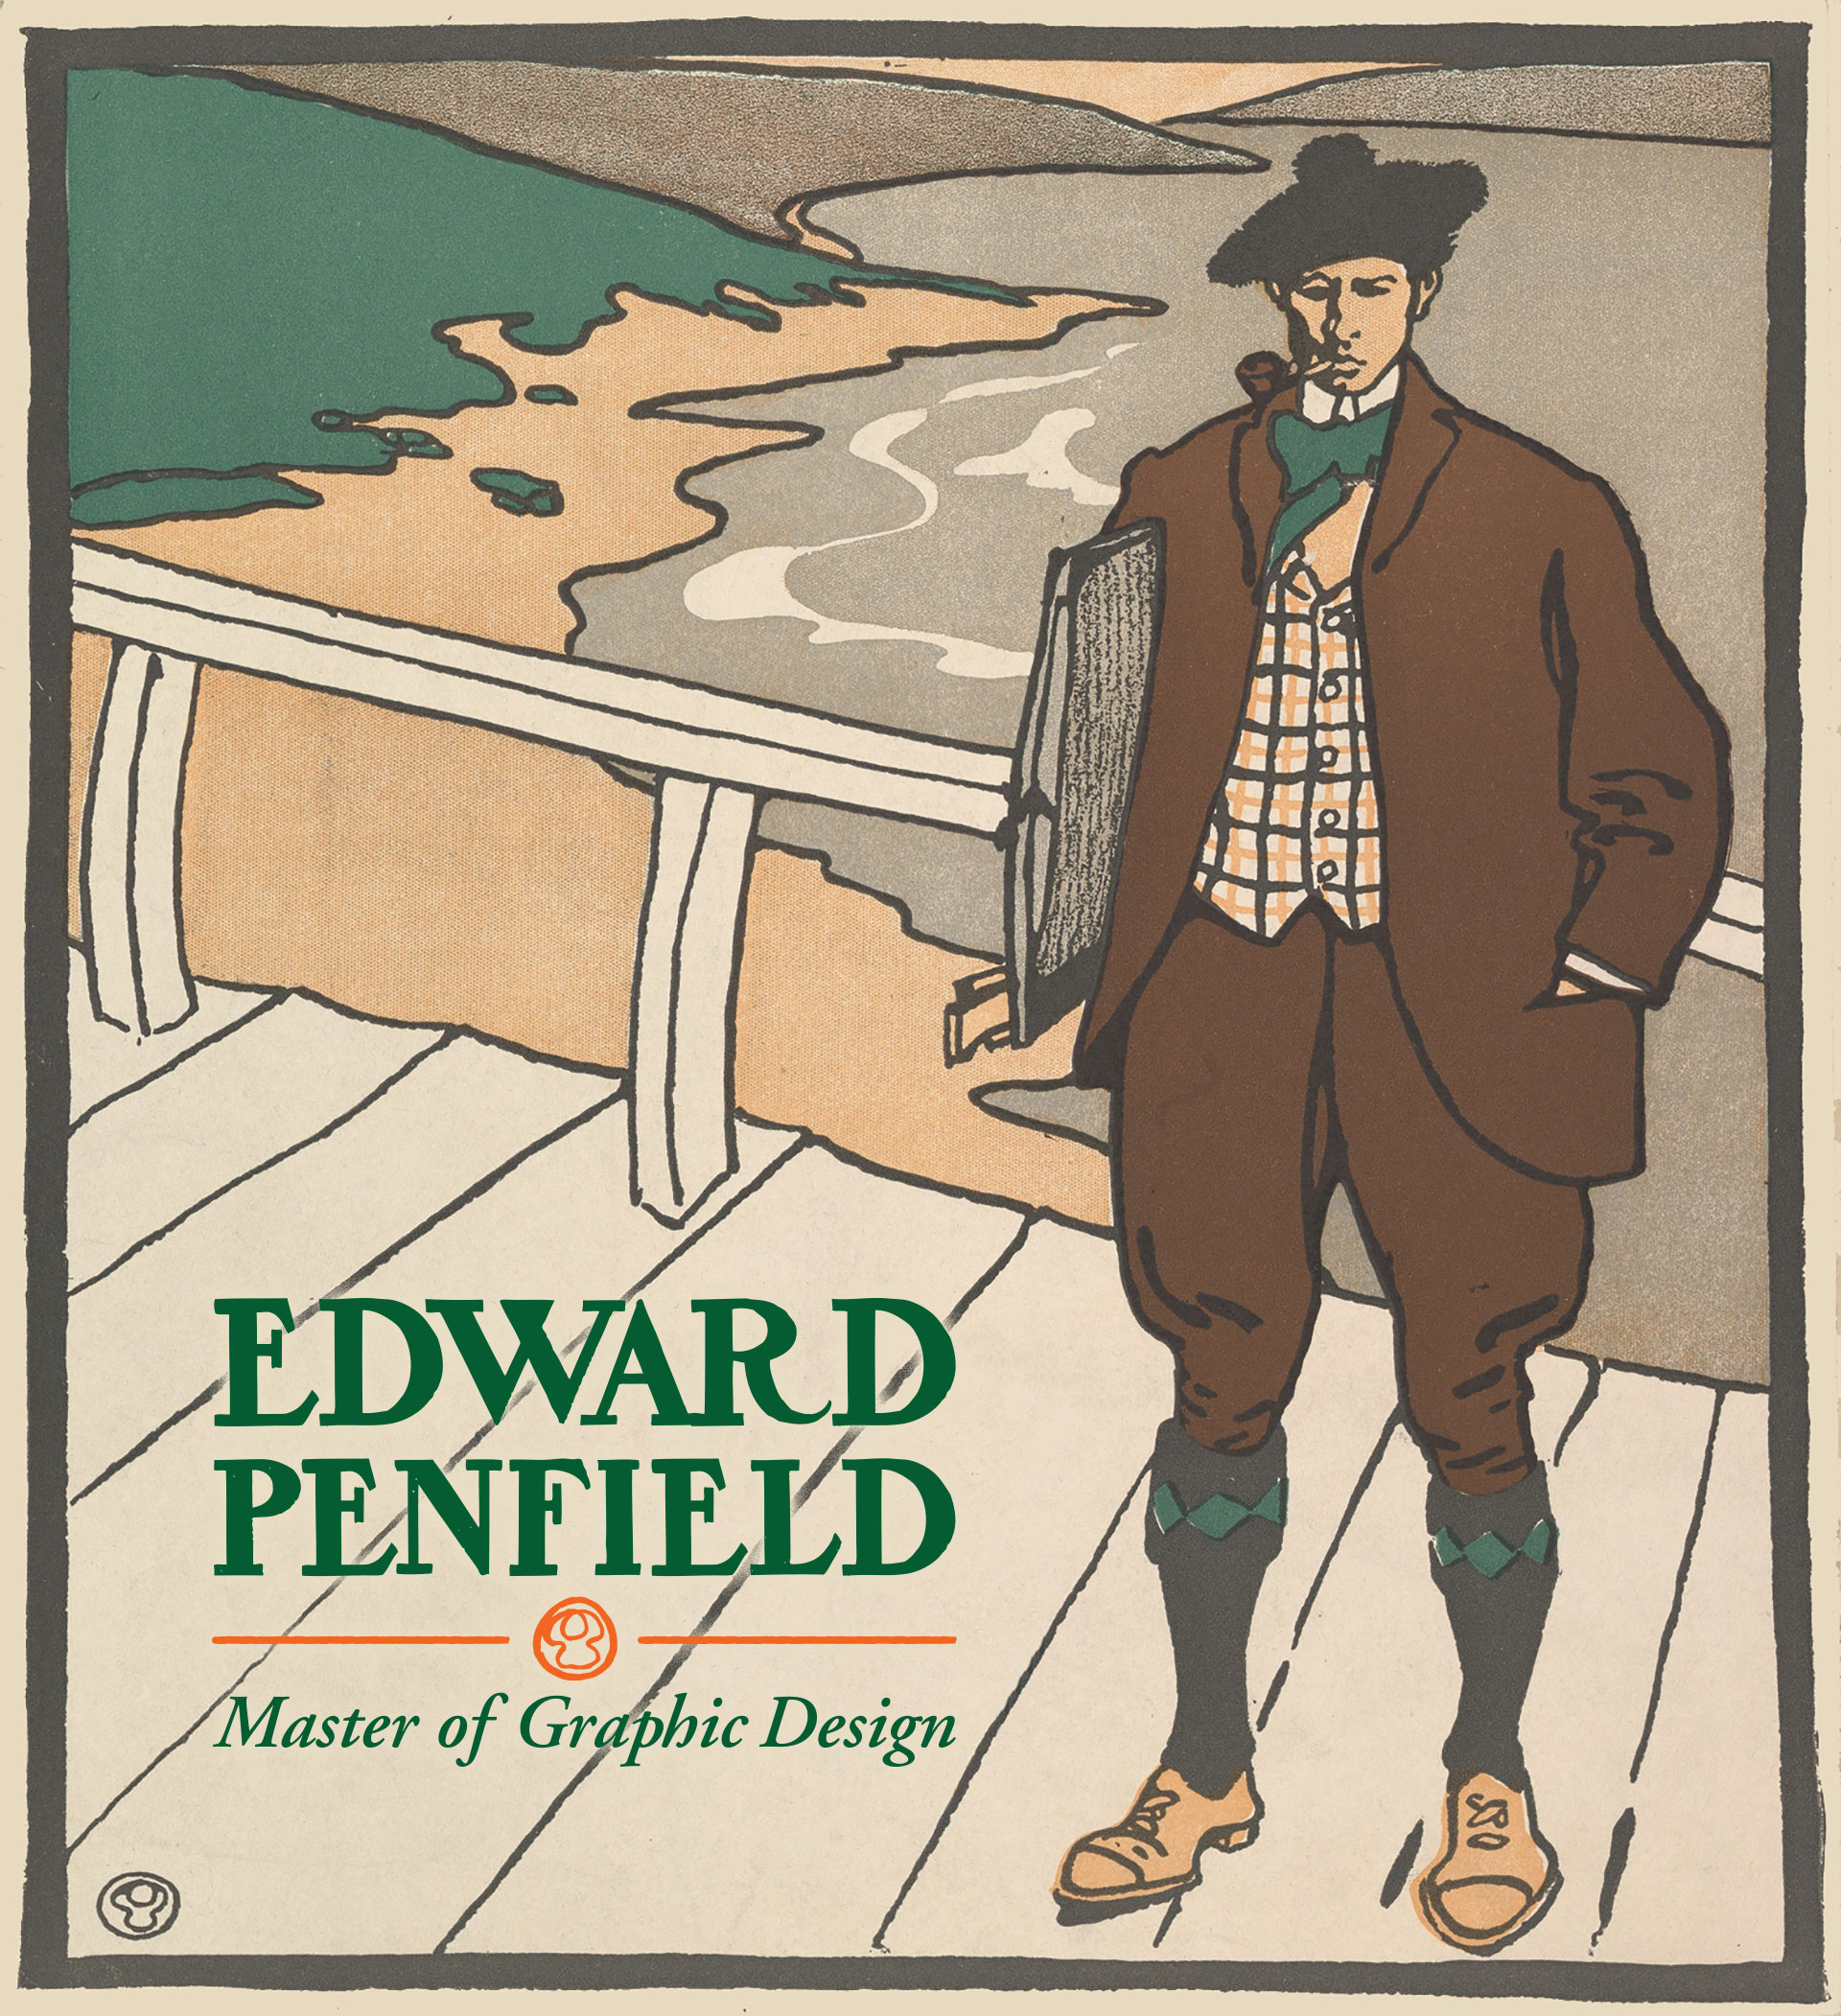 Edward Penfield (1866-1925), poster artist, illustrator and master of graphic design